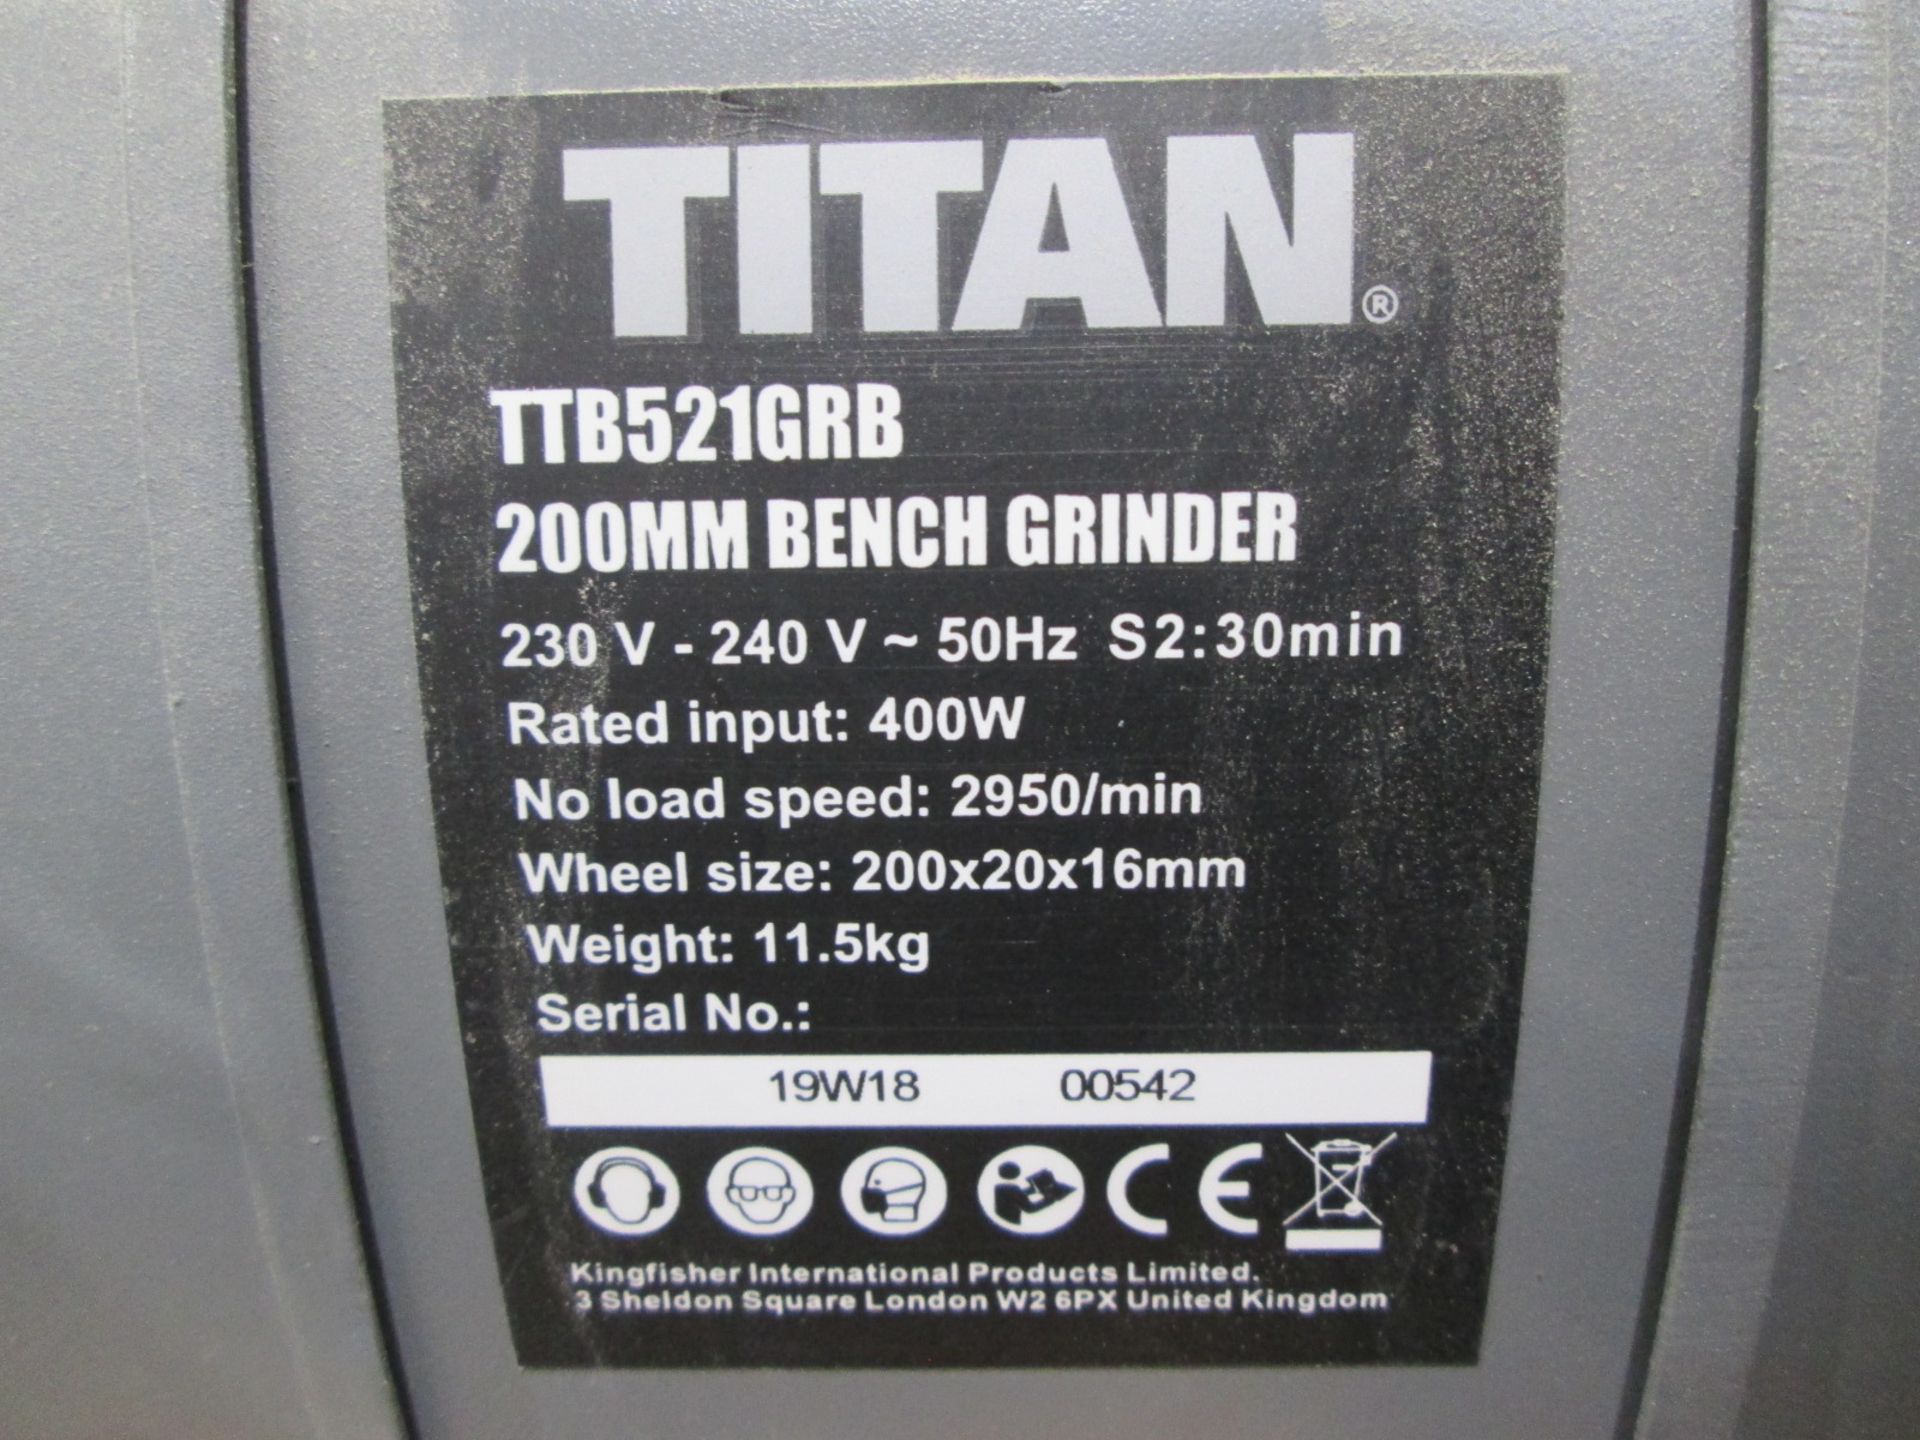 Titan TTB 521 GRB 200 mm Double Ended Bench Grinder - Image 2 of 3